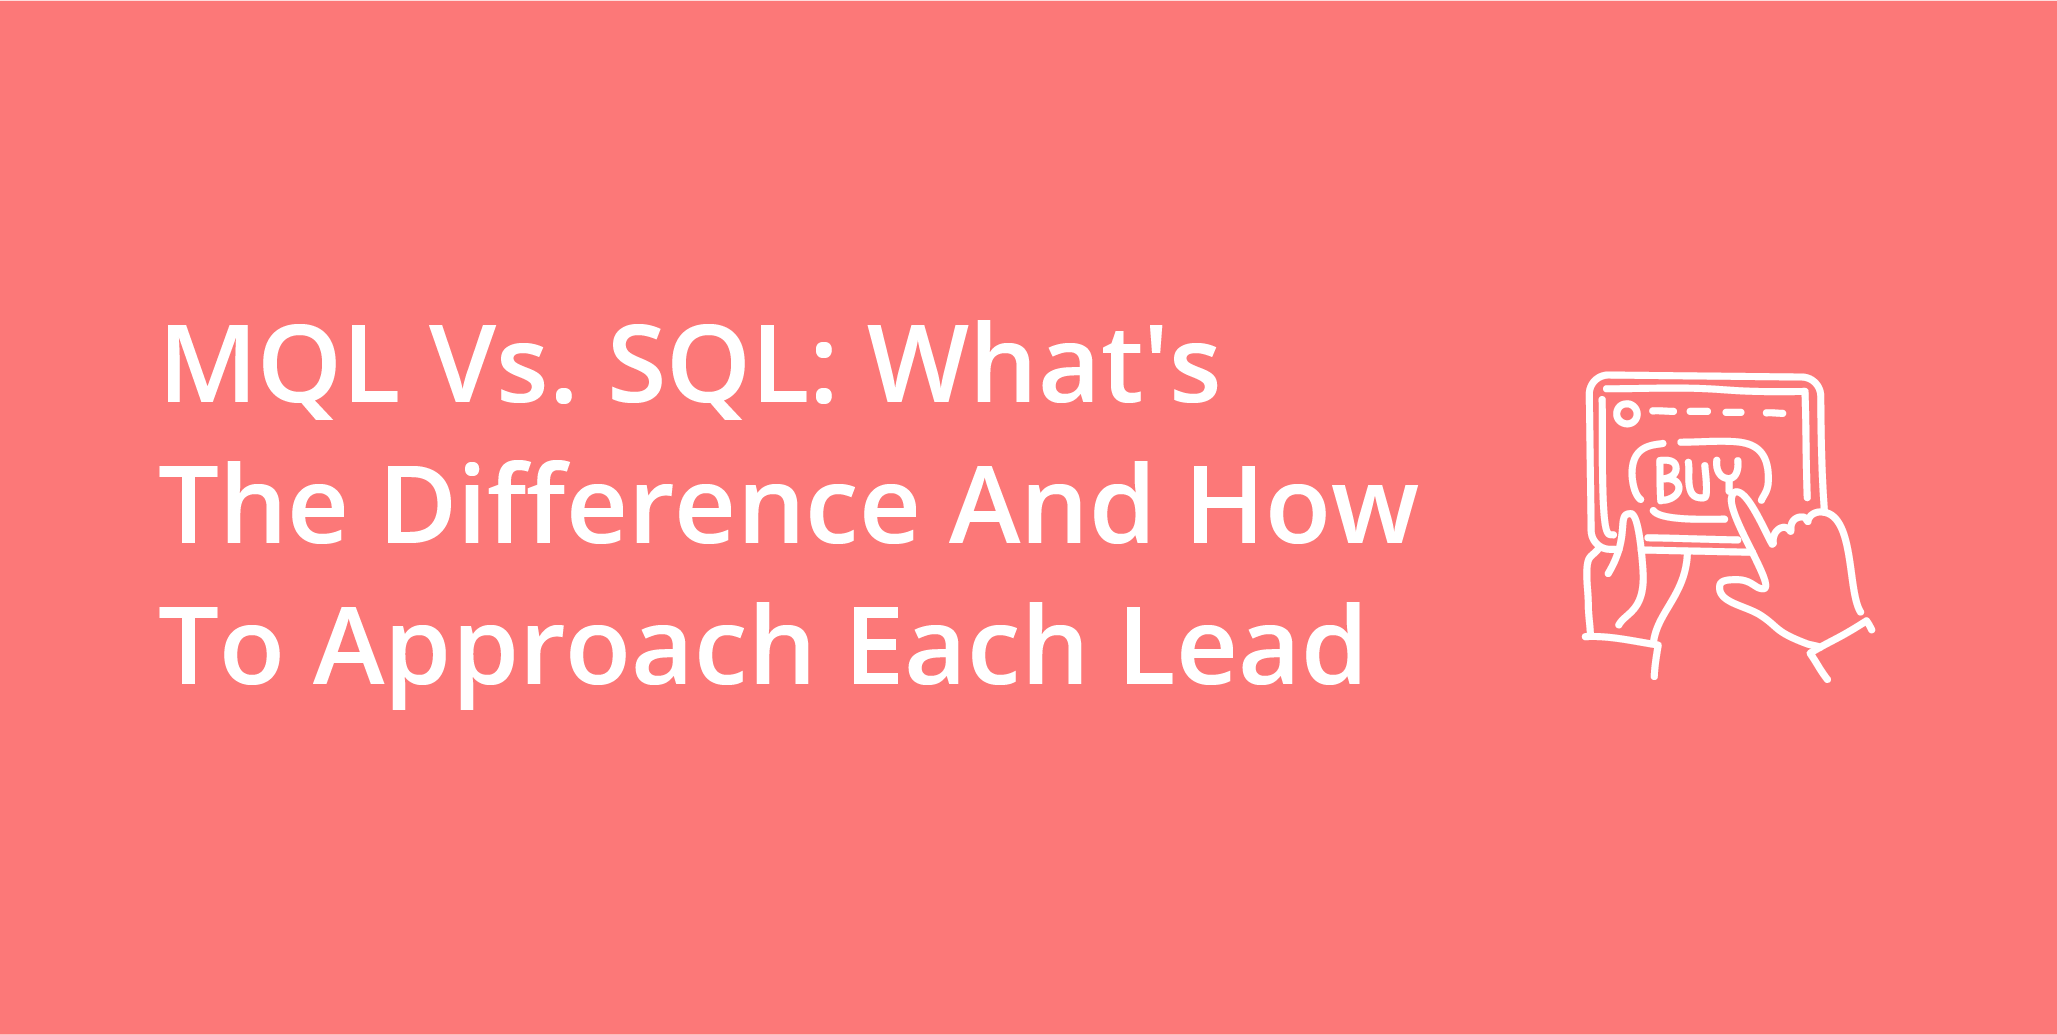 MQL Vs. SQL: What's The Difference And How To Approach Each Lead | Telephones for business